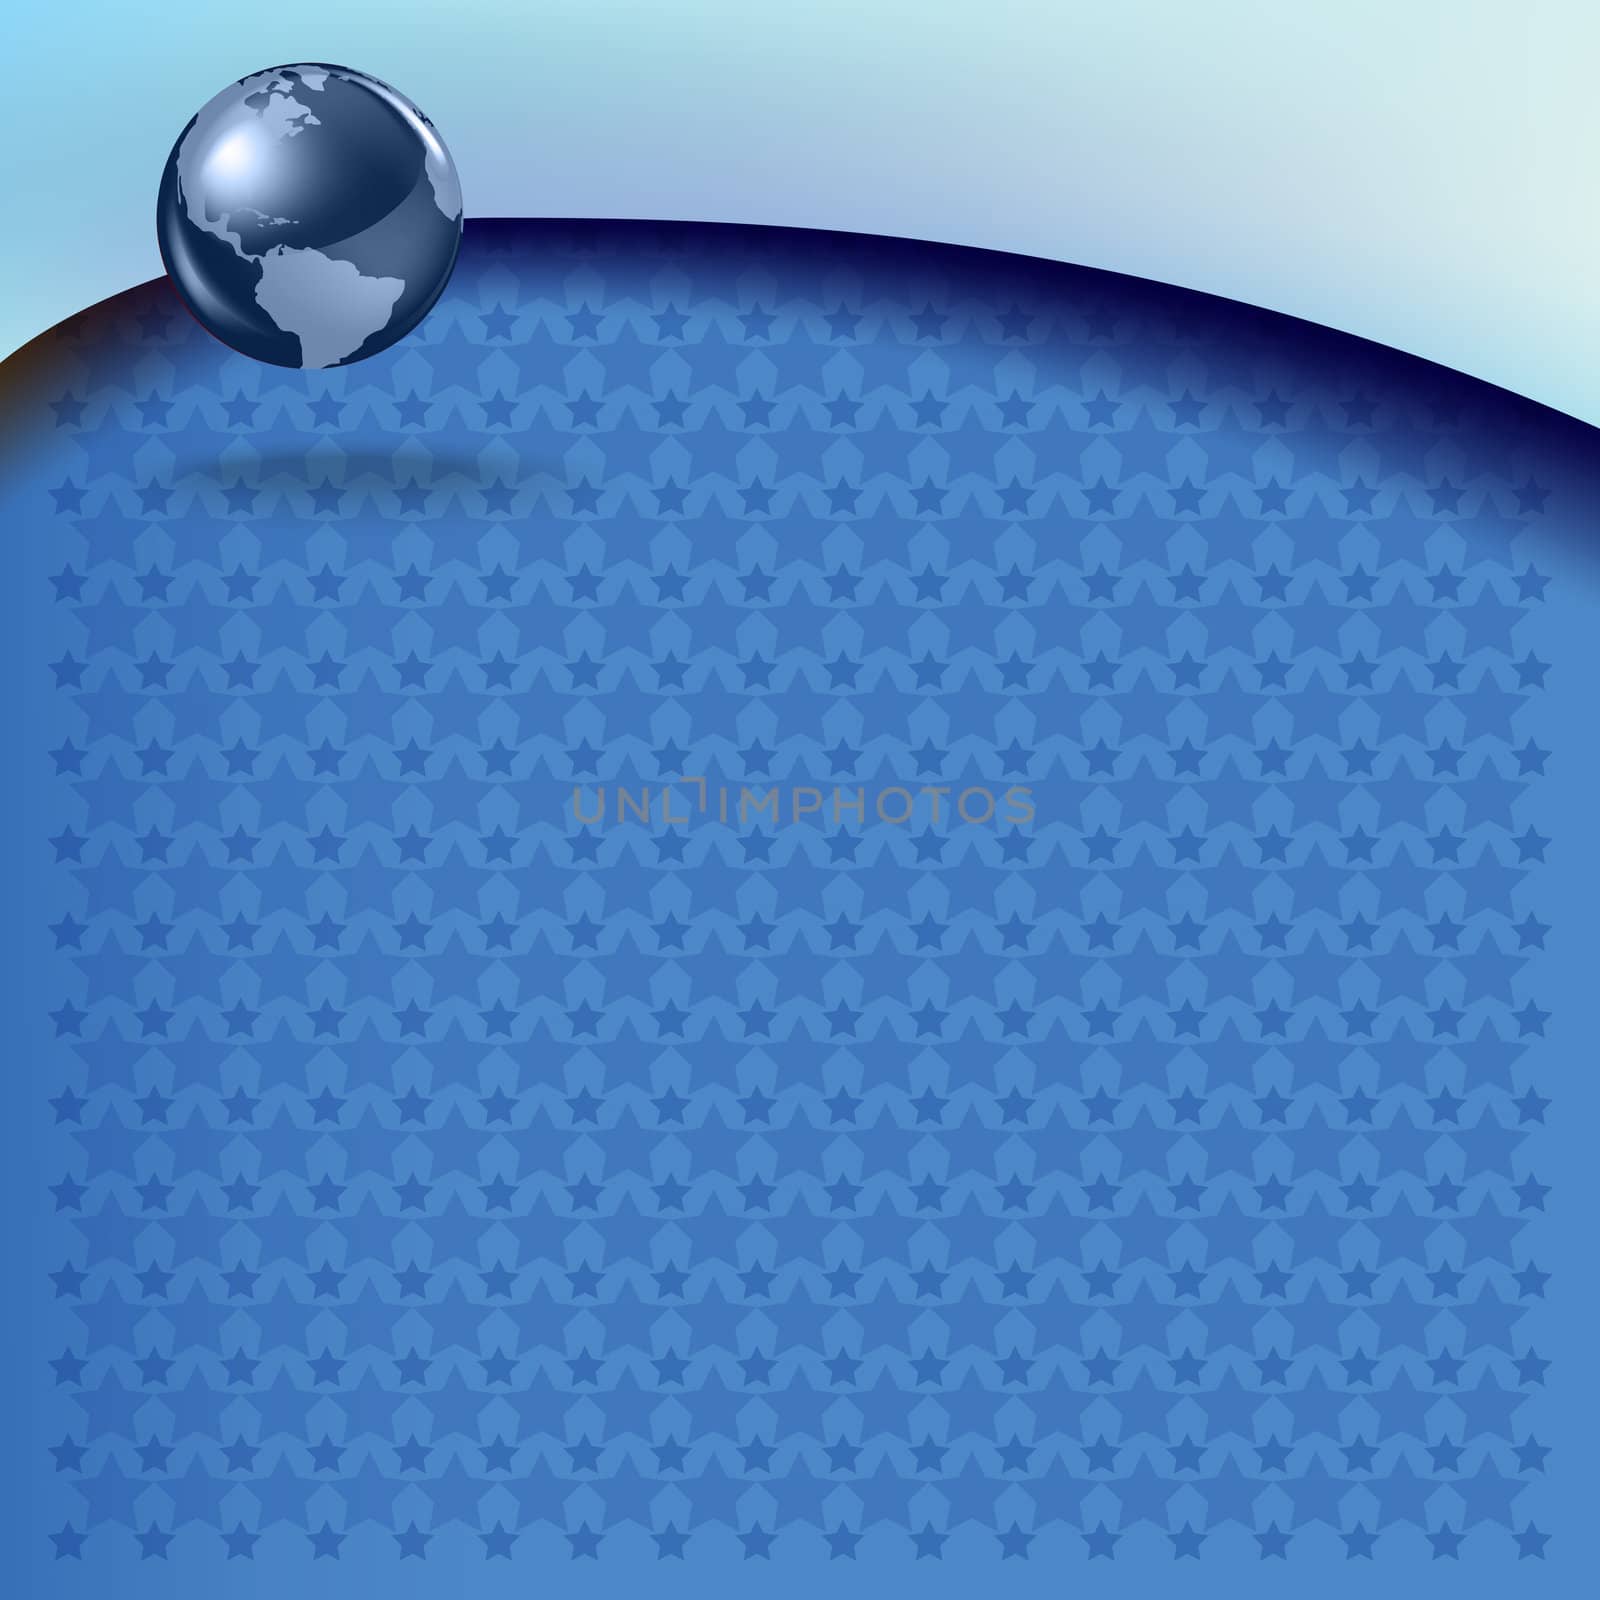 Abstract stars background with planet earth on blue